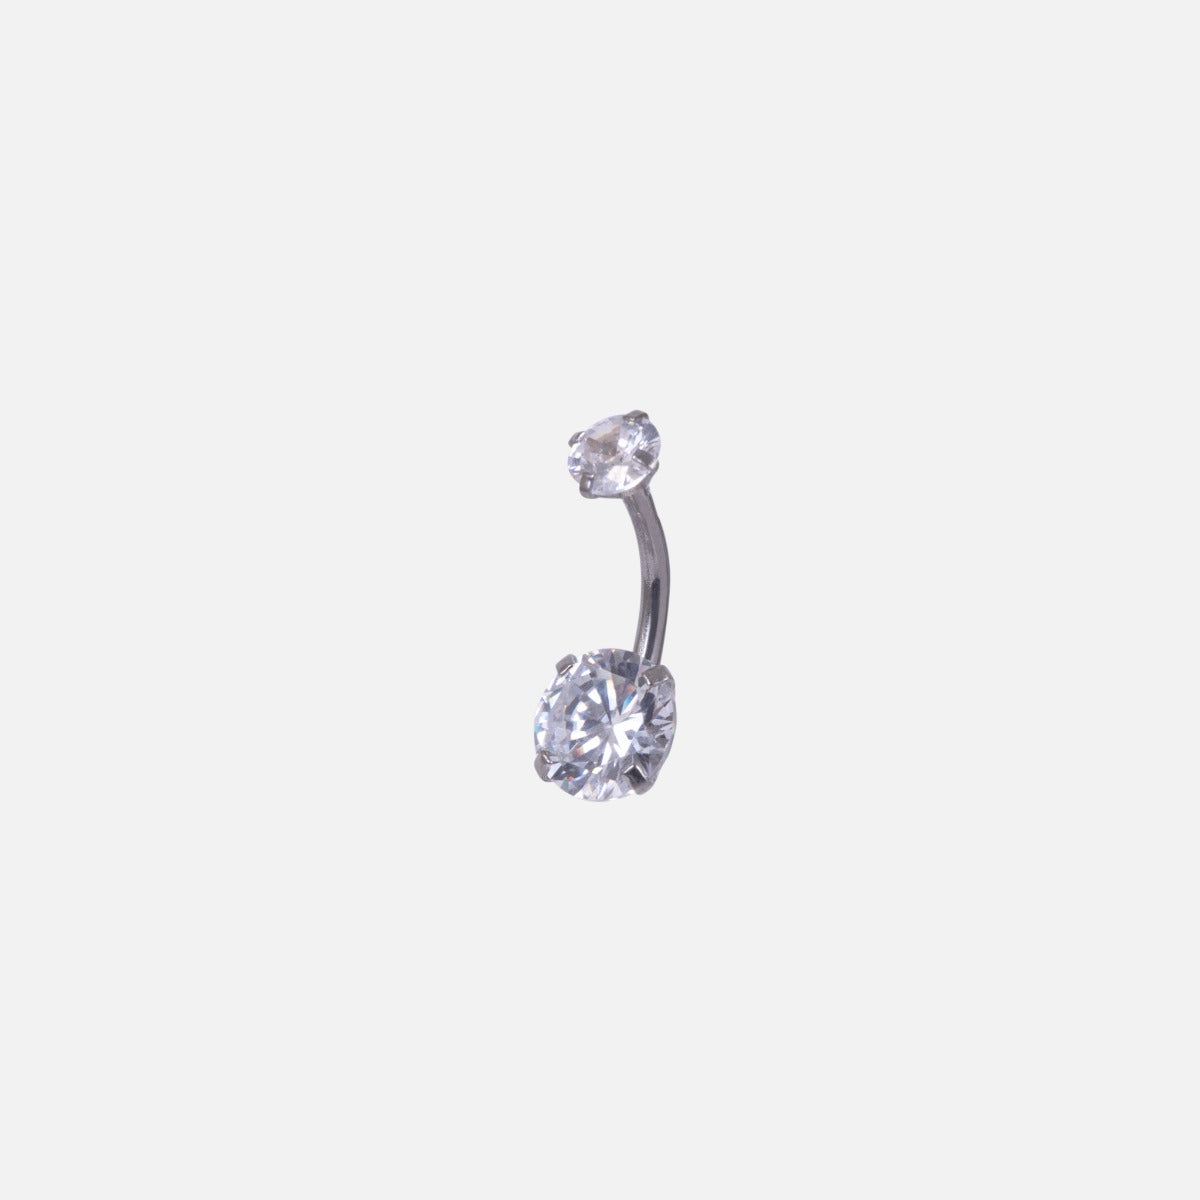 Stainless steel belly button ring with cubic zirconia